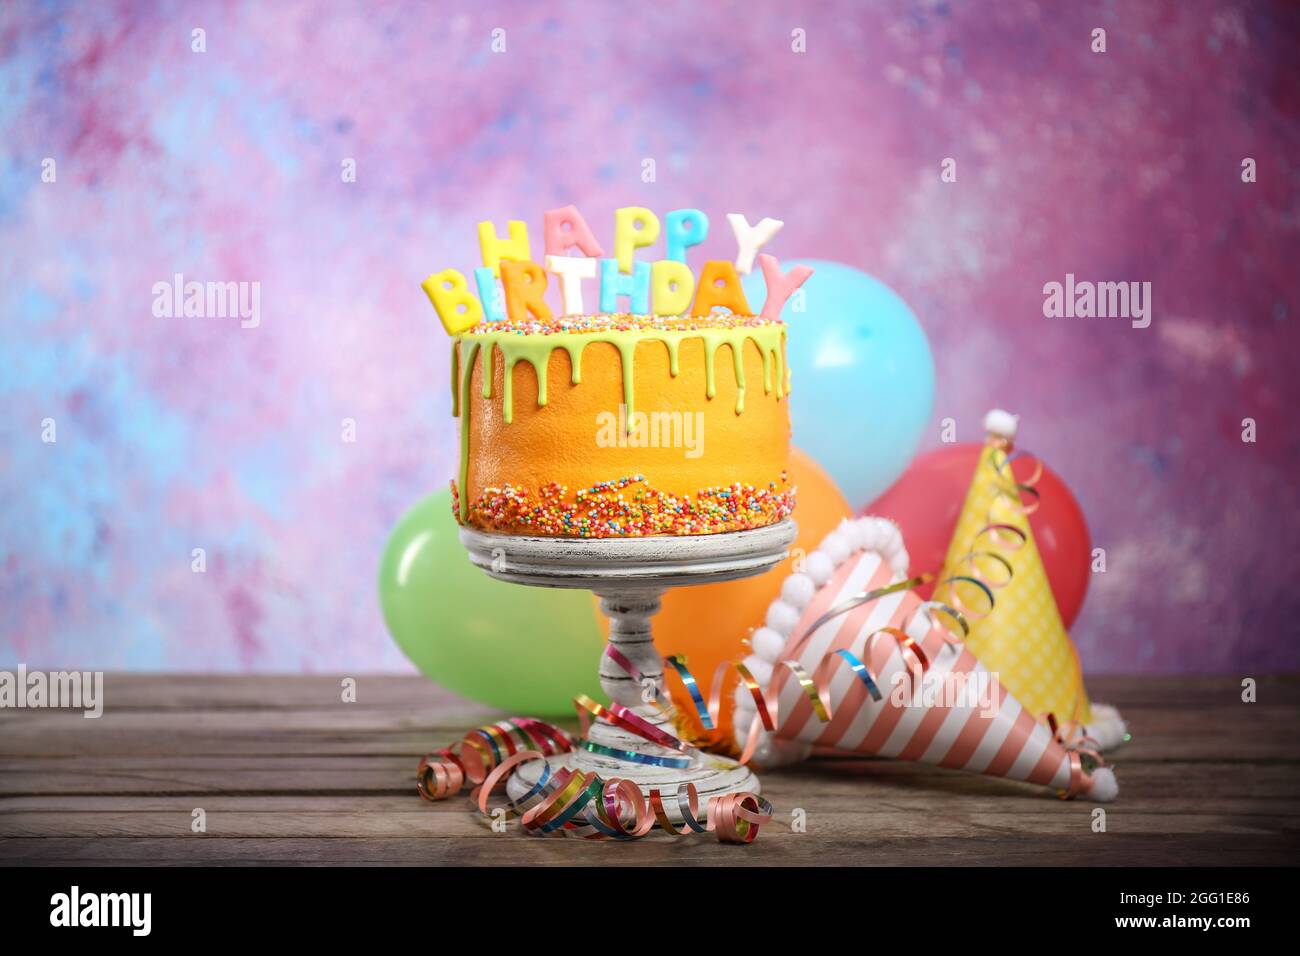 Tasty birthday cake with party hats on colorful background Stock Photo -  Alamy